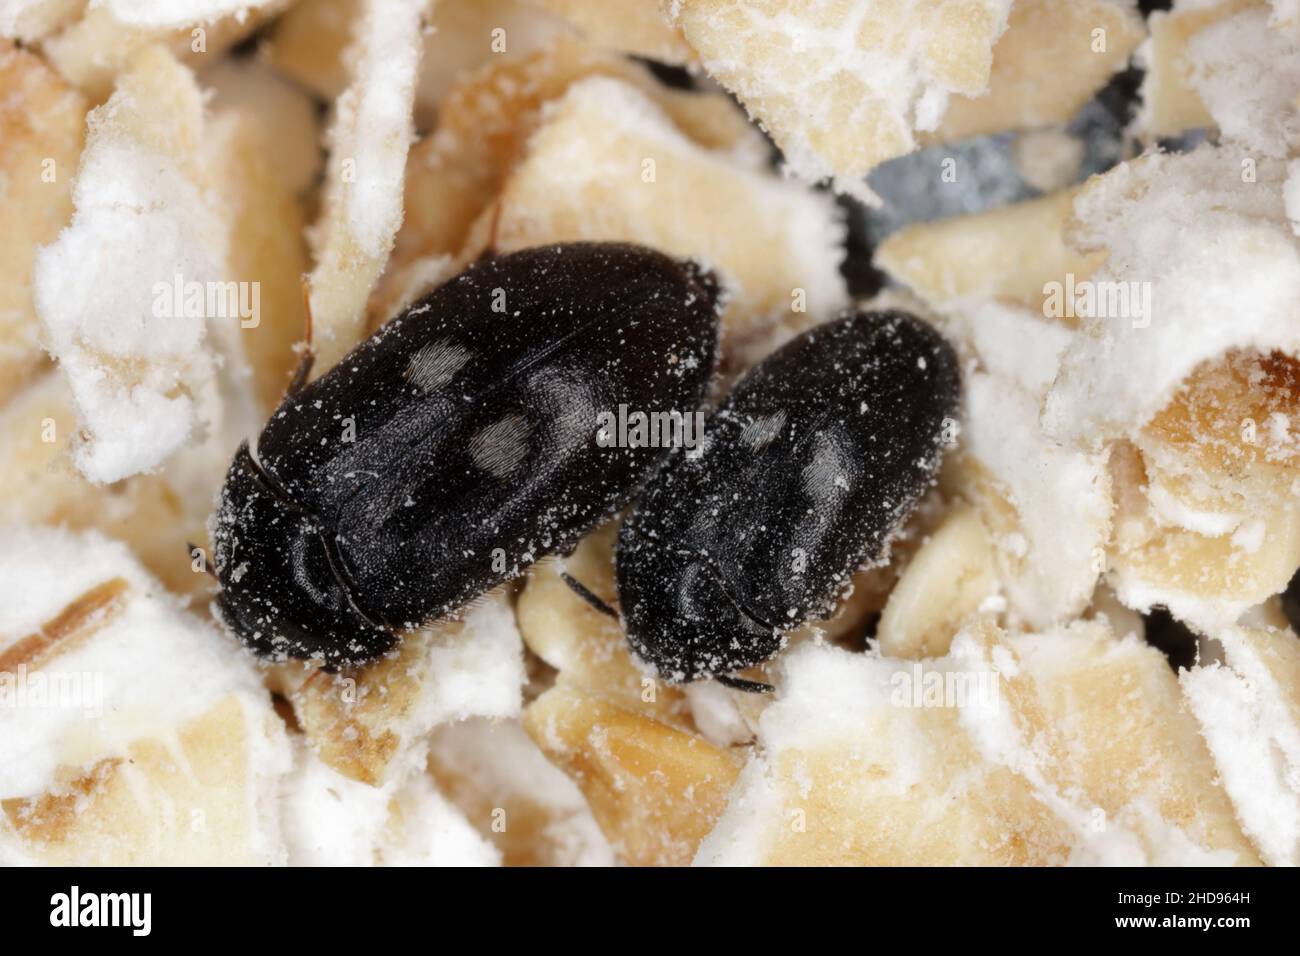 Female and male of Attagenus pellio the fur beetle or carpet beetle from the family Dermestidae a skin beetles On oat flakes. Stock Photo